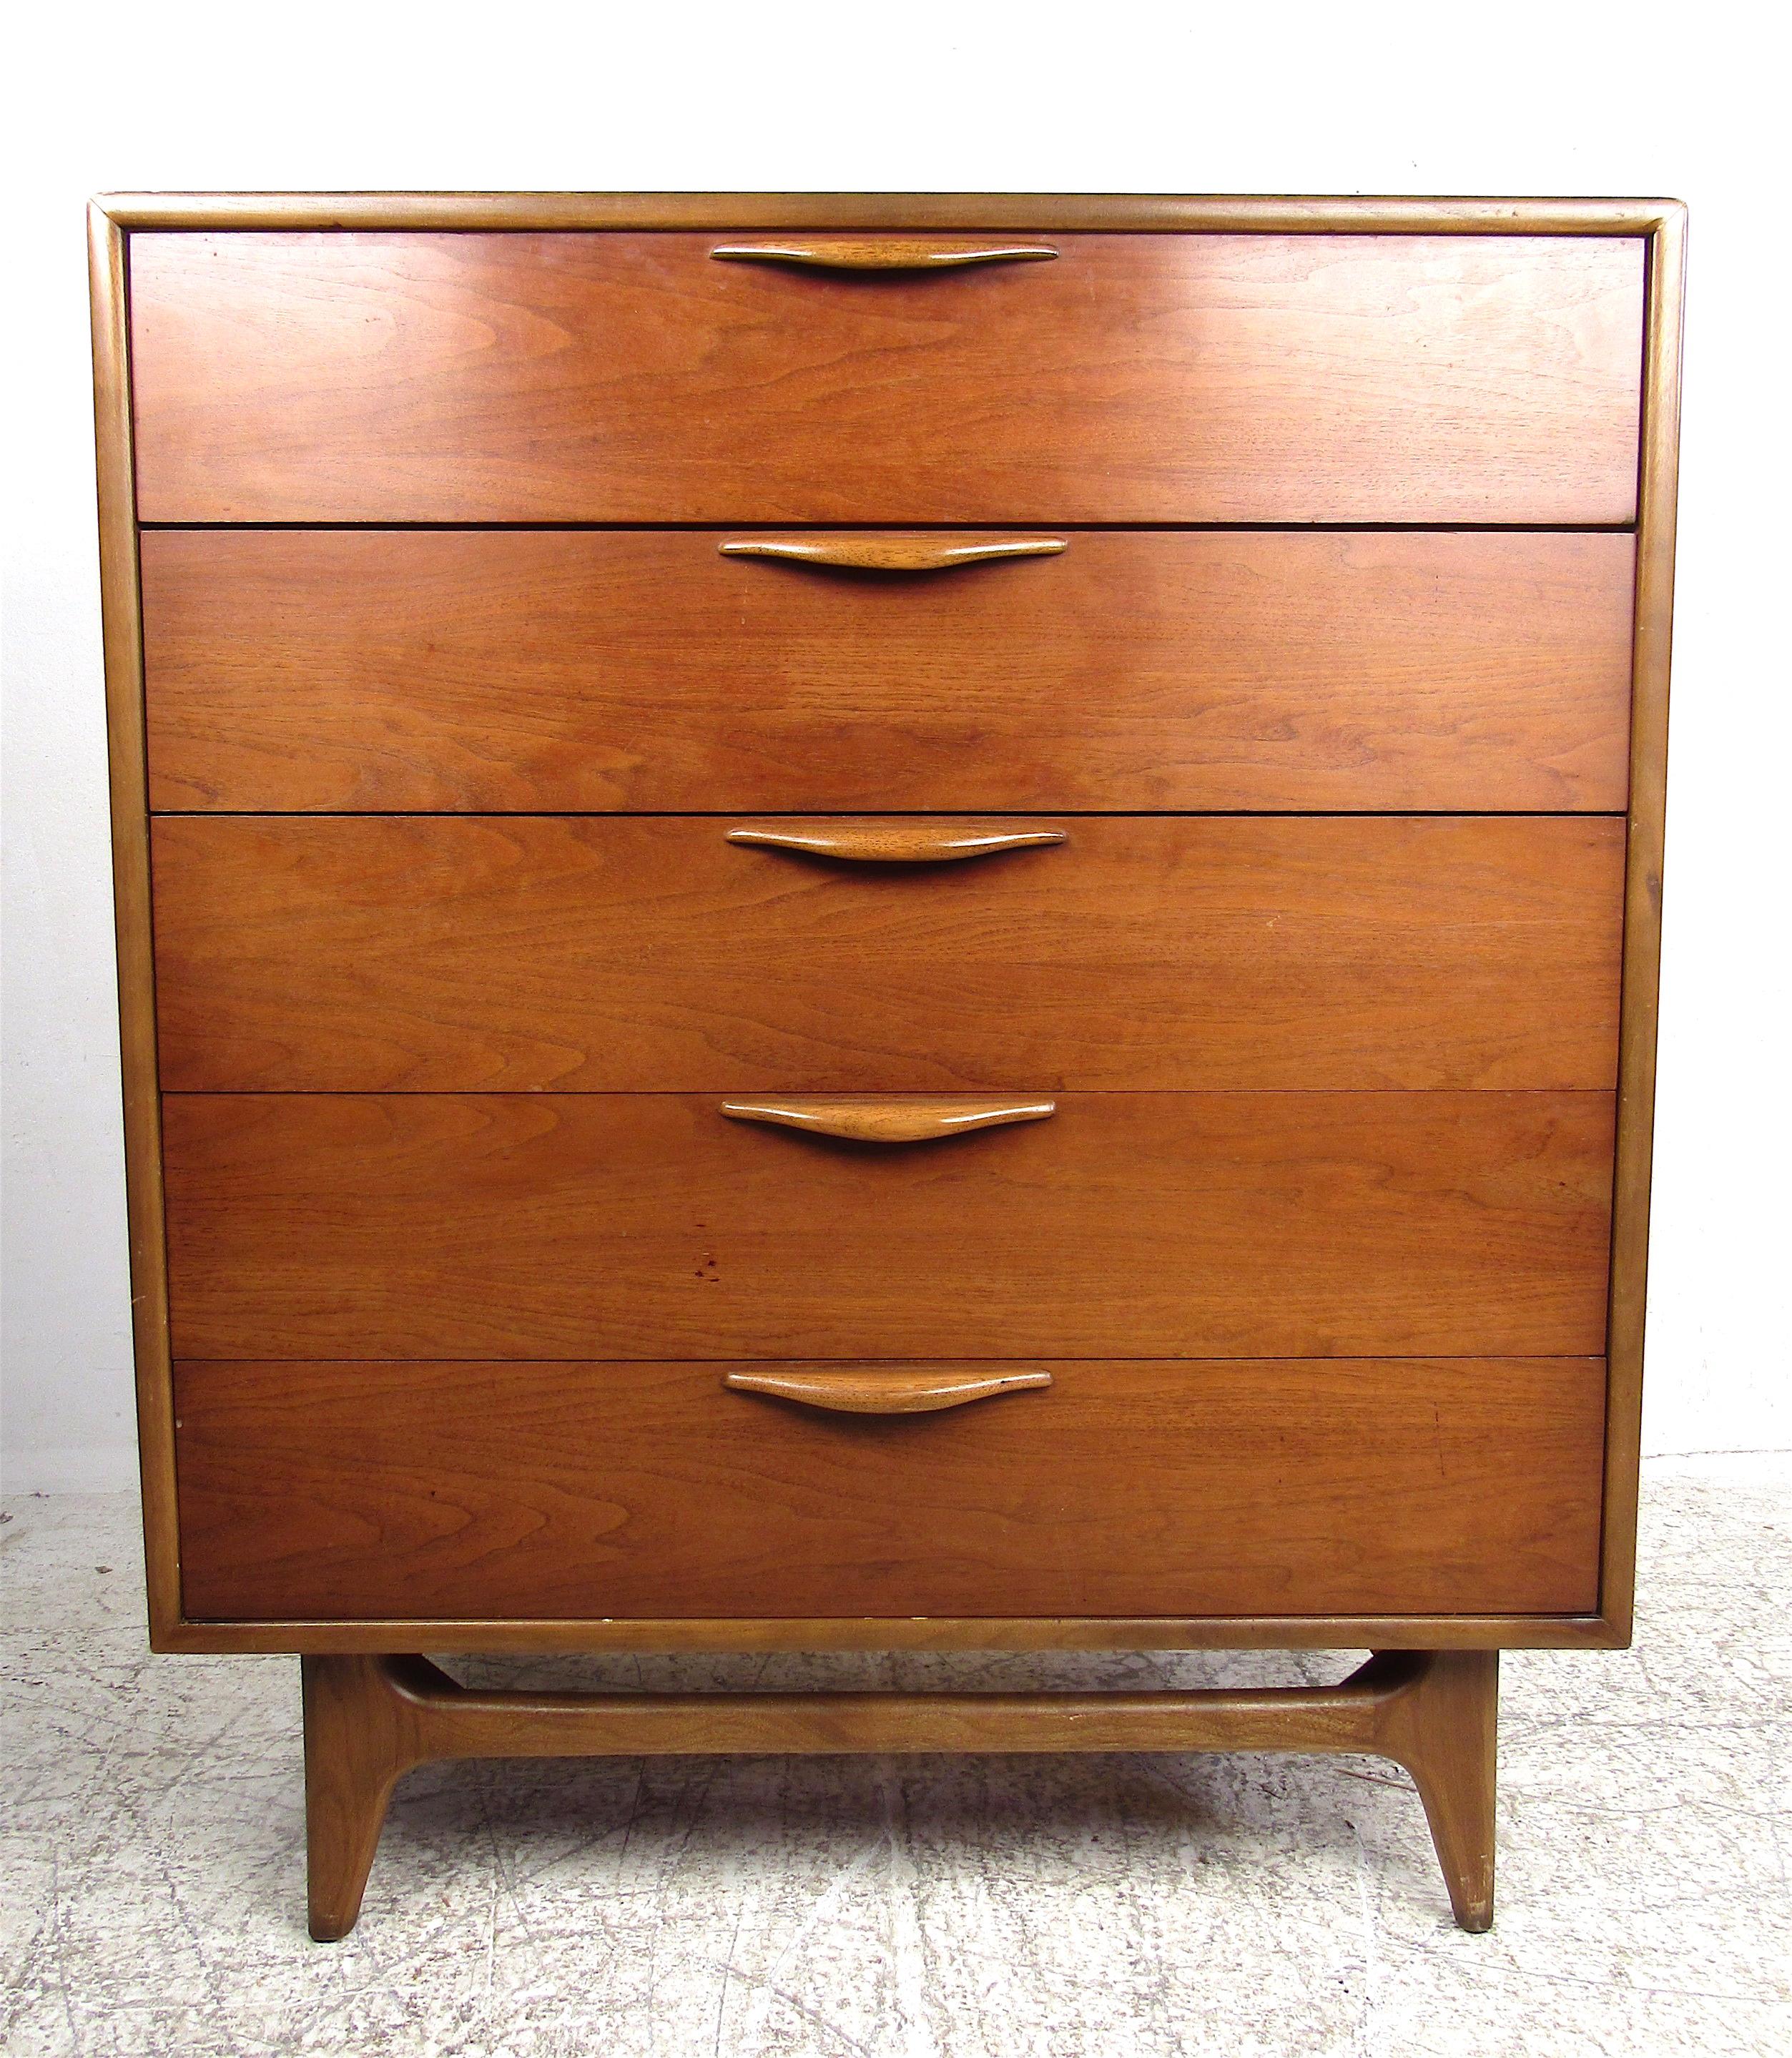 A stunning vintage modern highboy dresser with five hefty drawers for ample storage space. Elegant walnut wood grain, sculpted drawer pulls, and splayed legs add to the midcentury appeal. This versatile chest of drawers makes the perfect fit in any